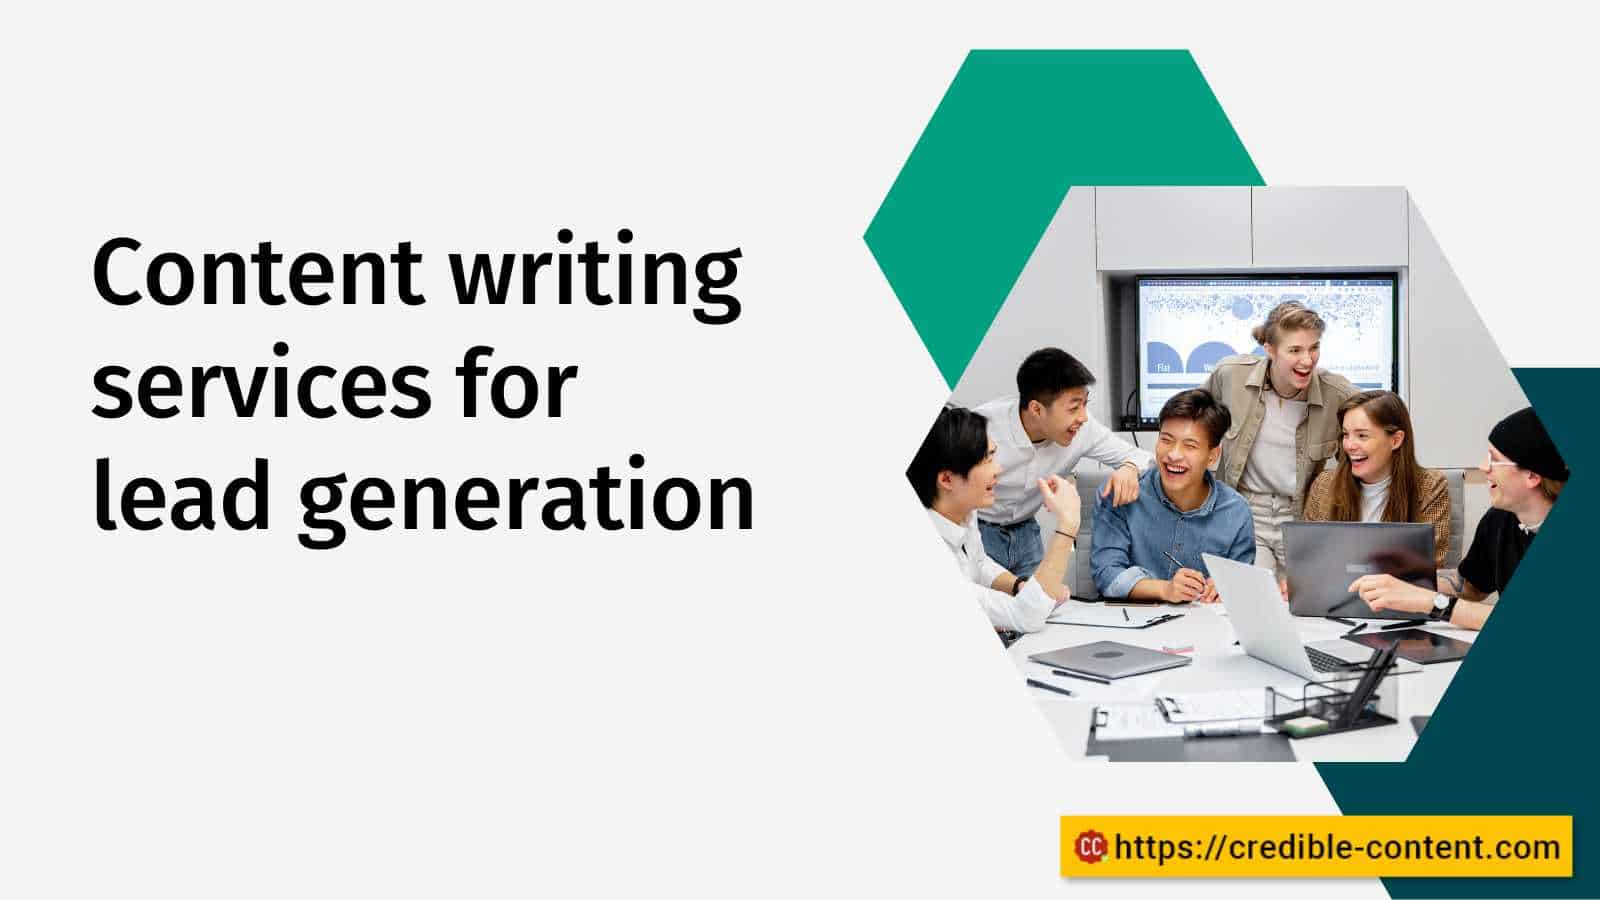 Content writing services for lead generation